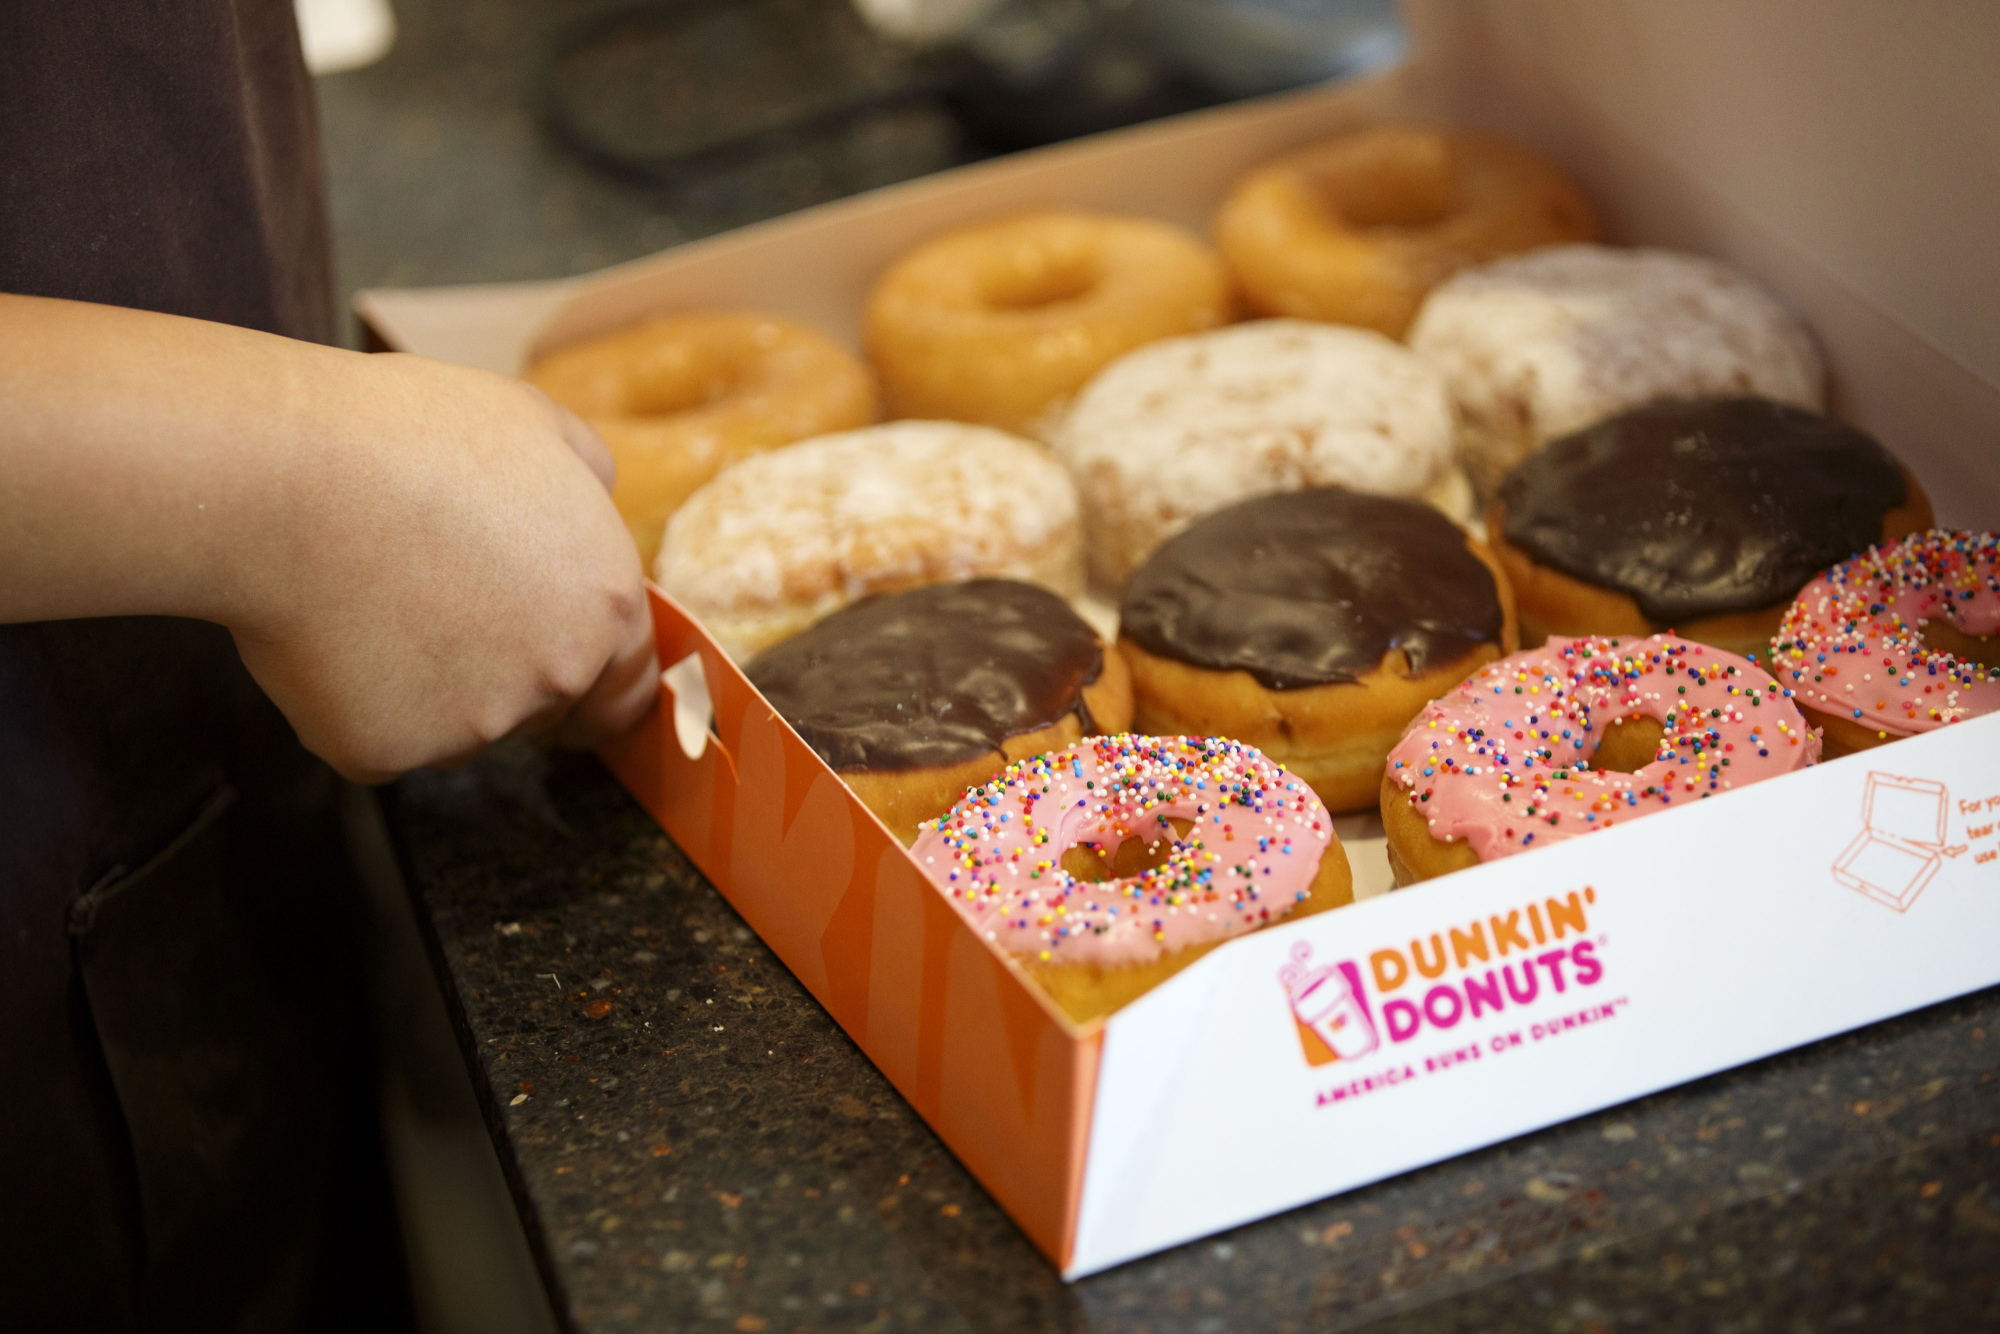 Dunkin' Donuts Rebrands as Dunkin' Bloomberg